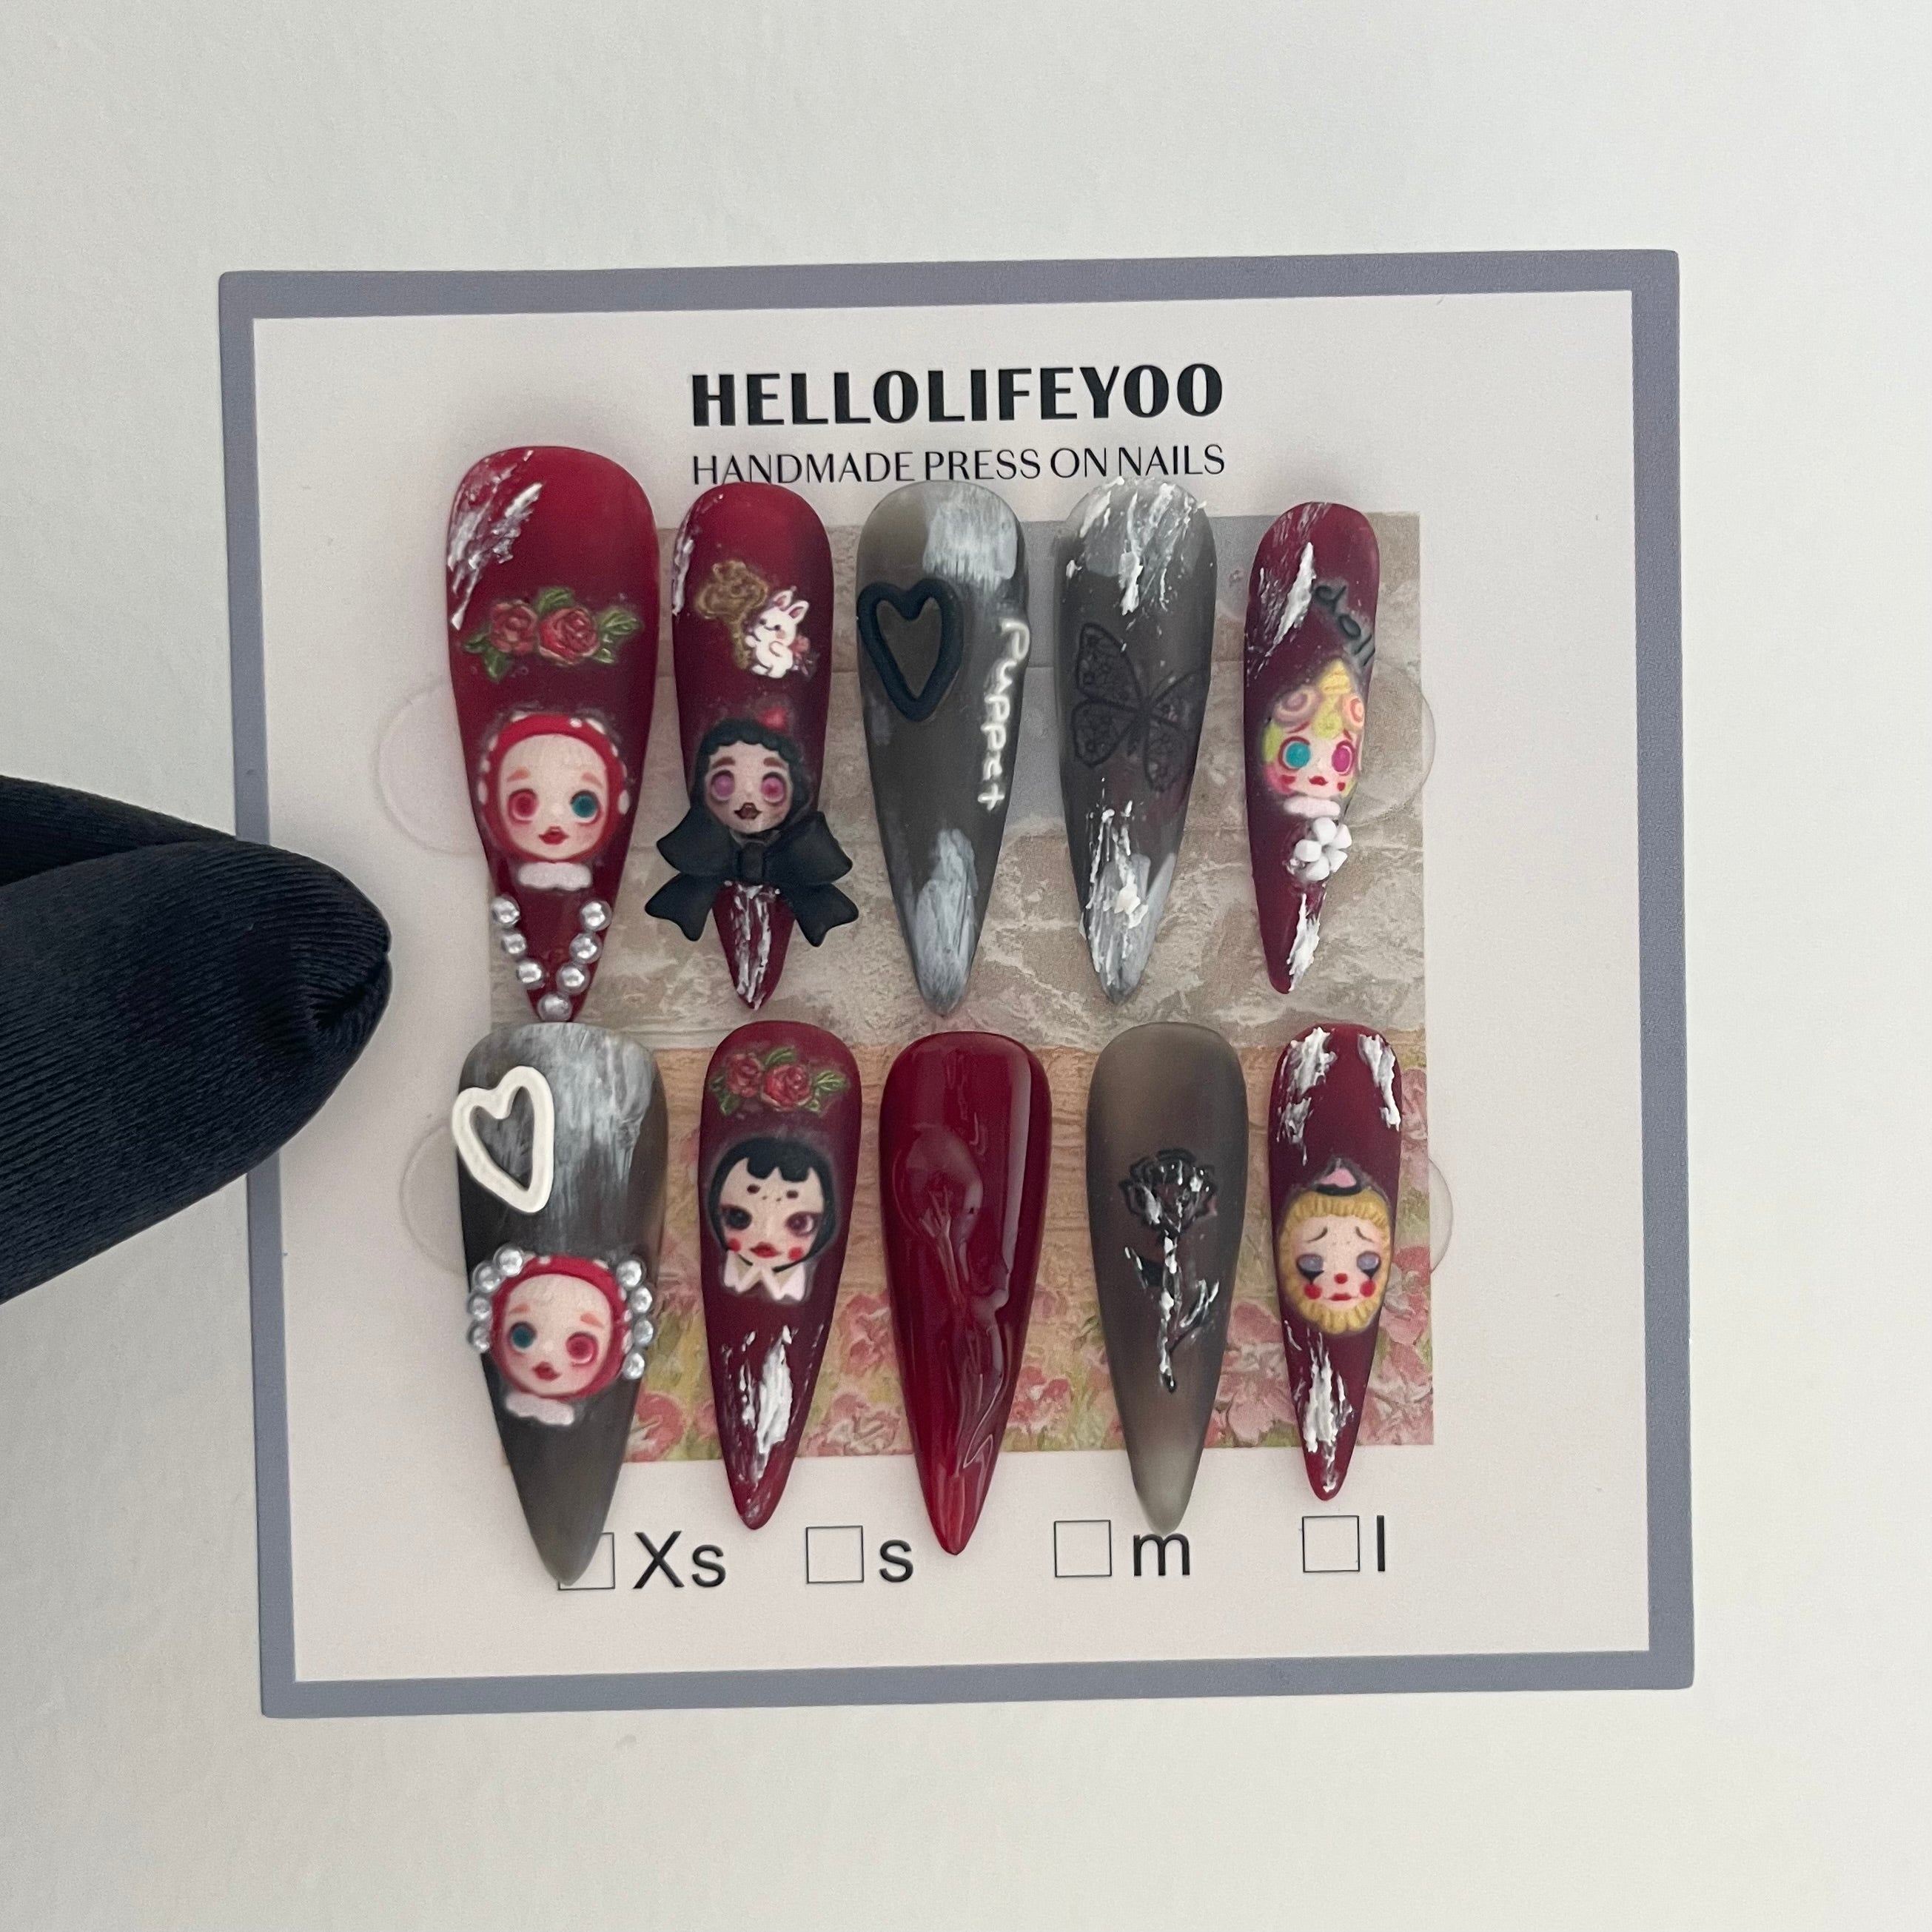 PUPPET DOLL-TEN PIECES OF HANDCRAFTED PRESS ON NAIL